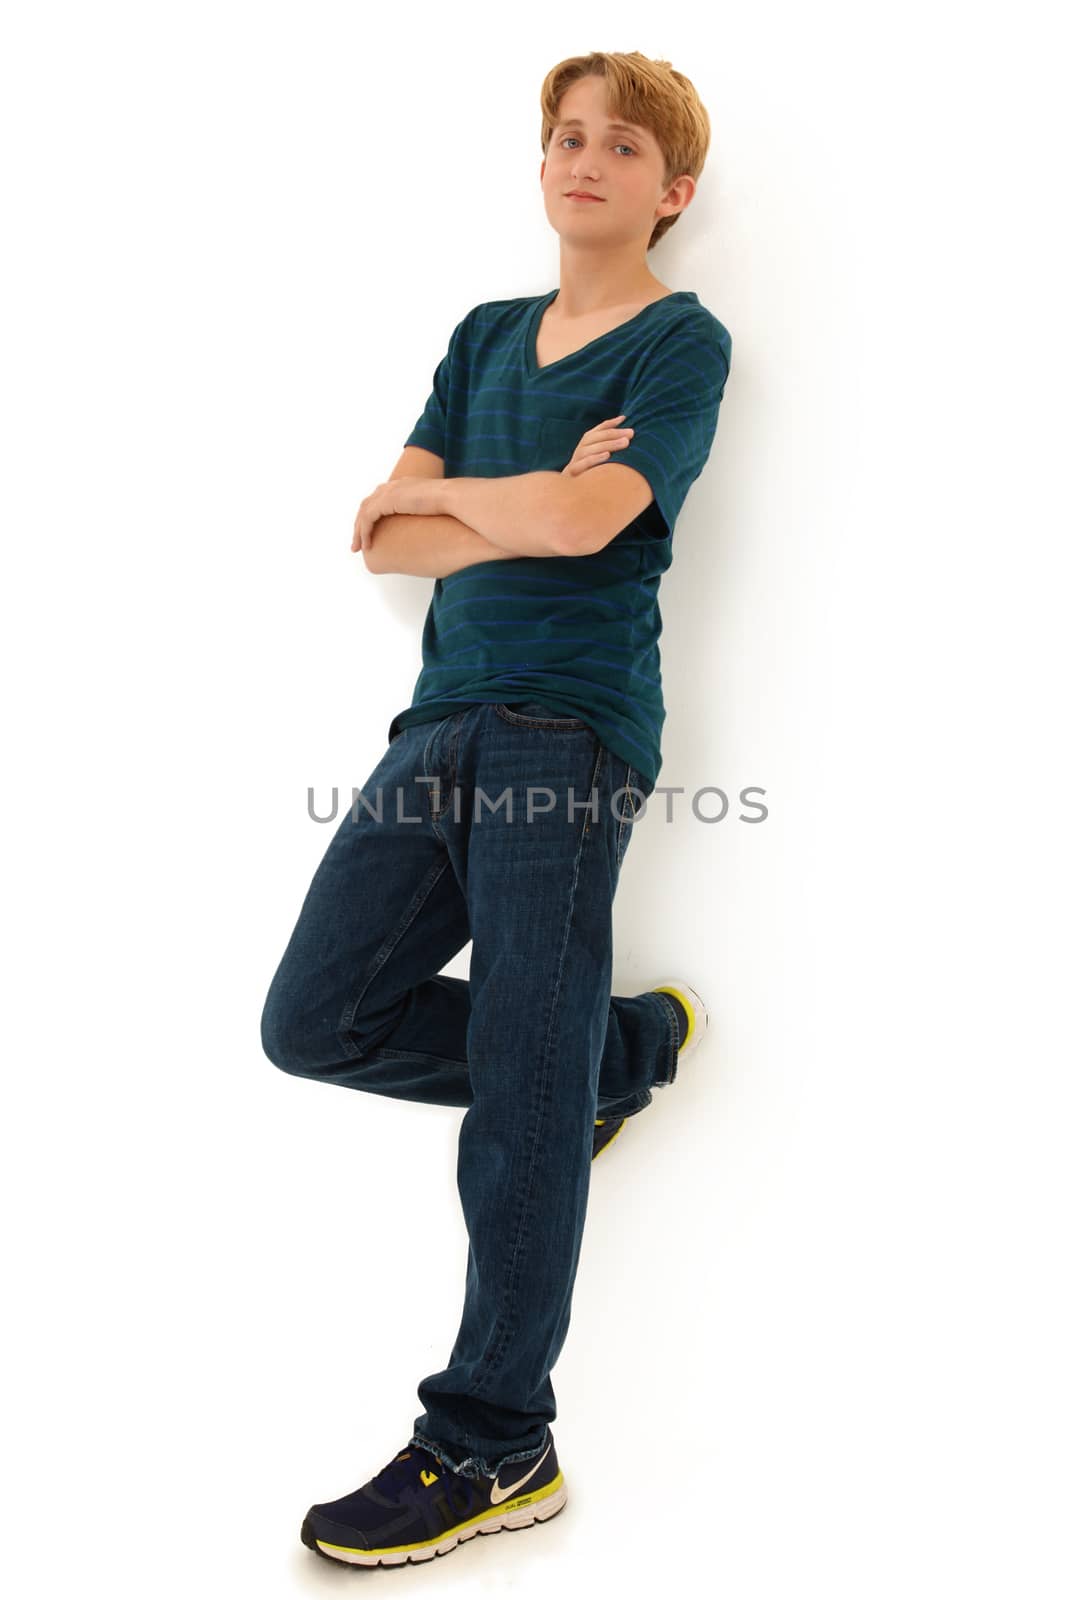 Attractive Teen Boy Leaning Against White Wall